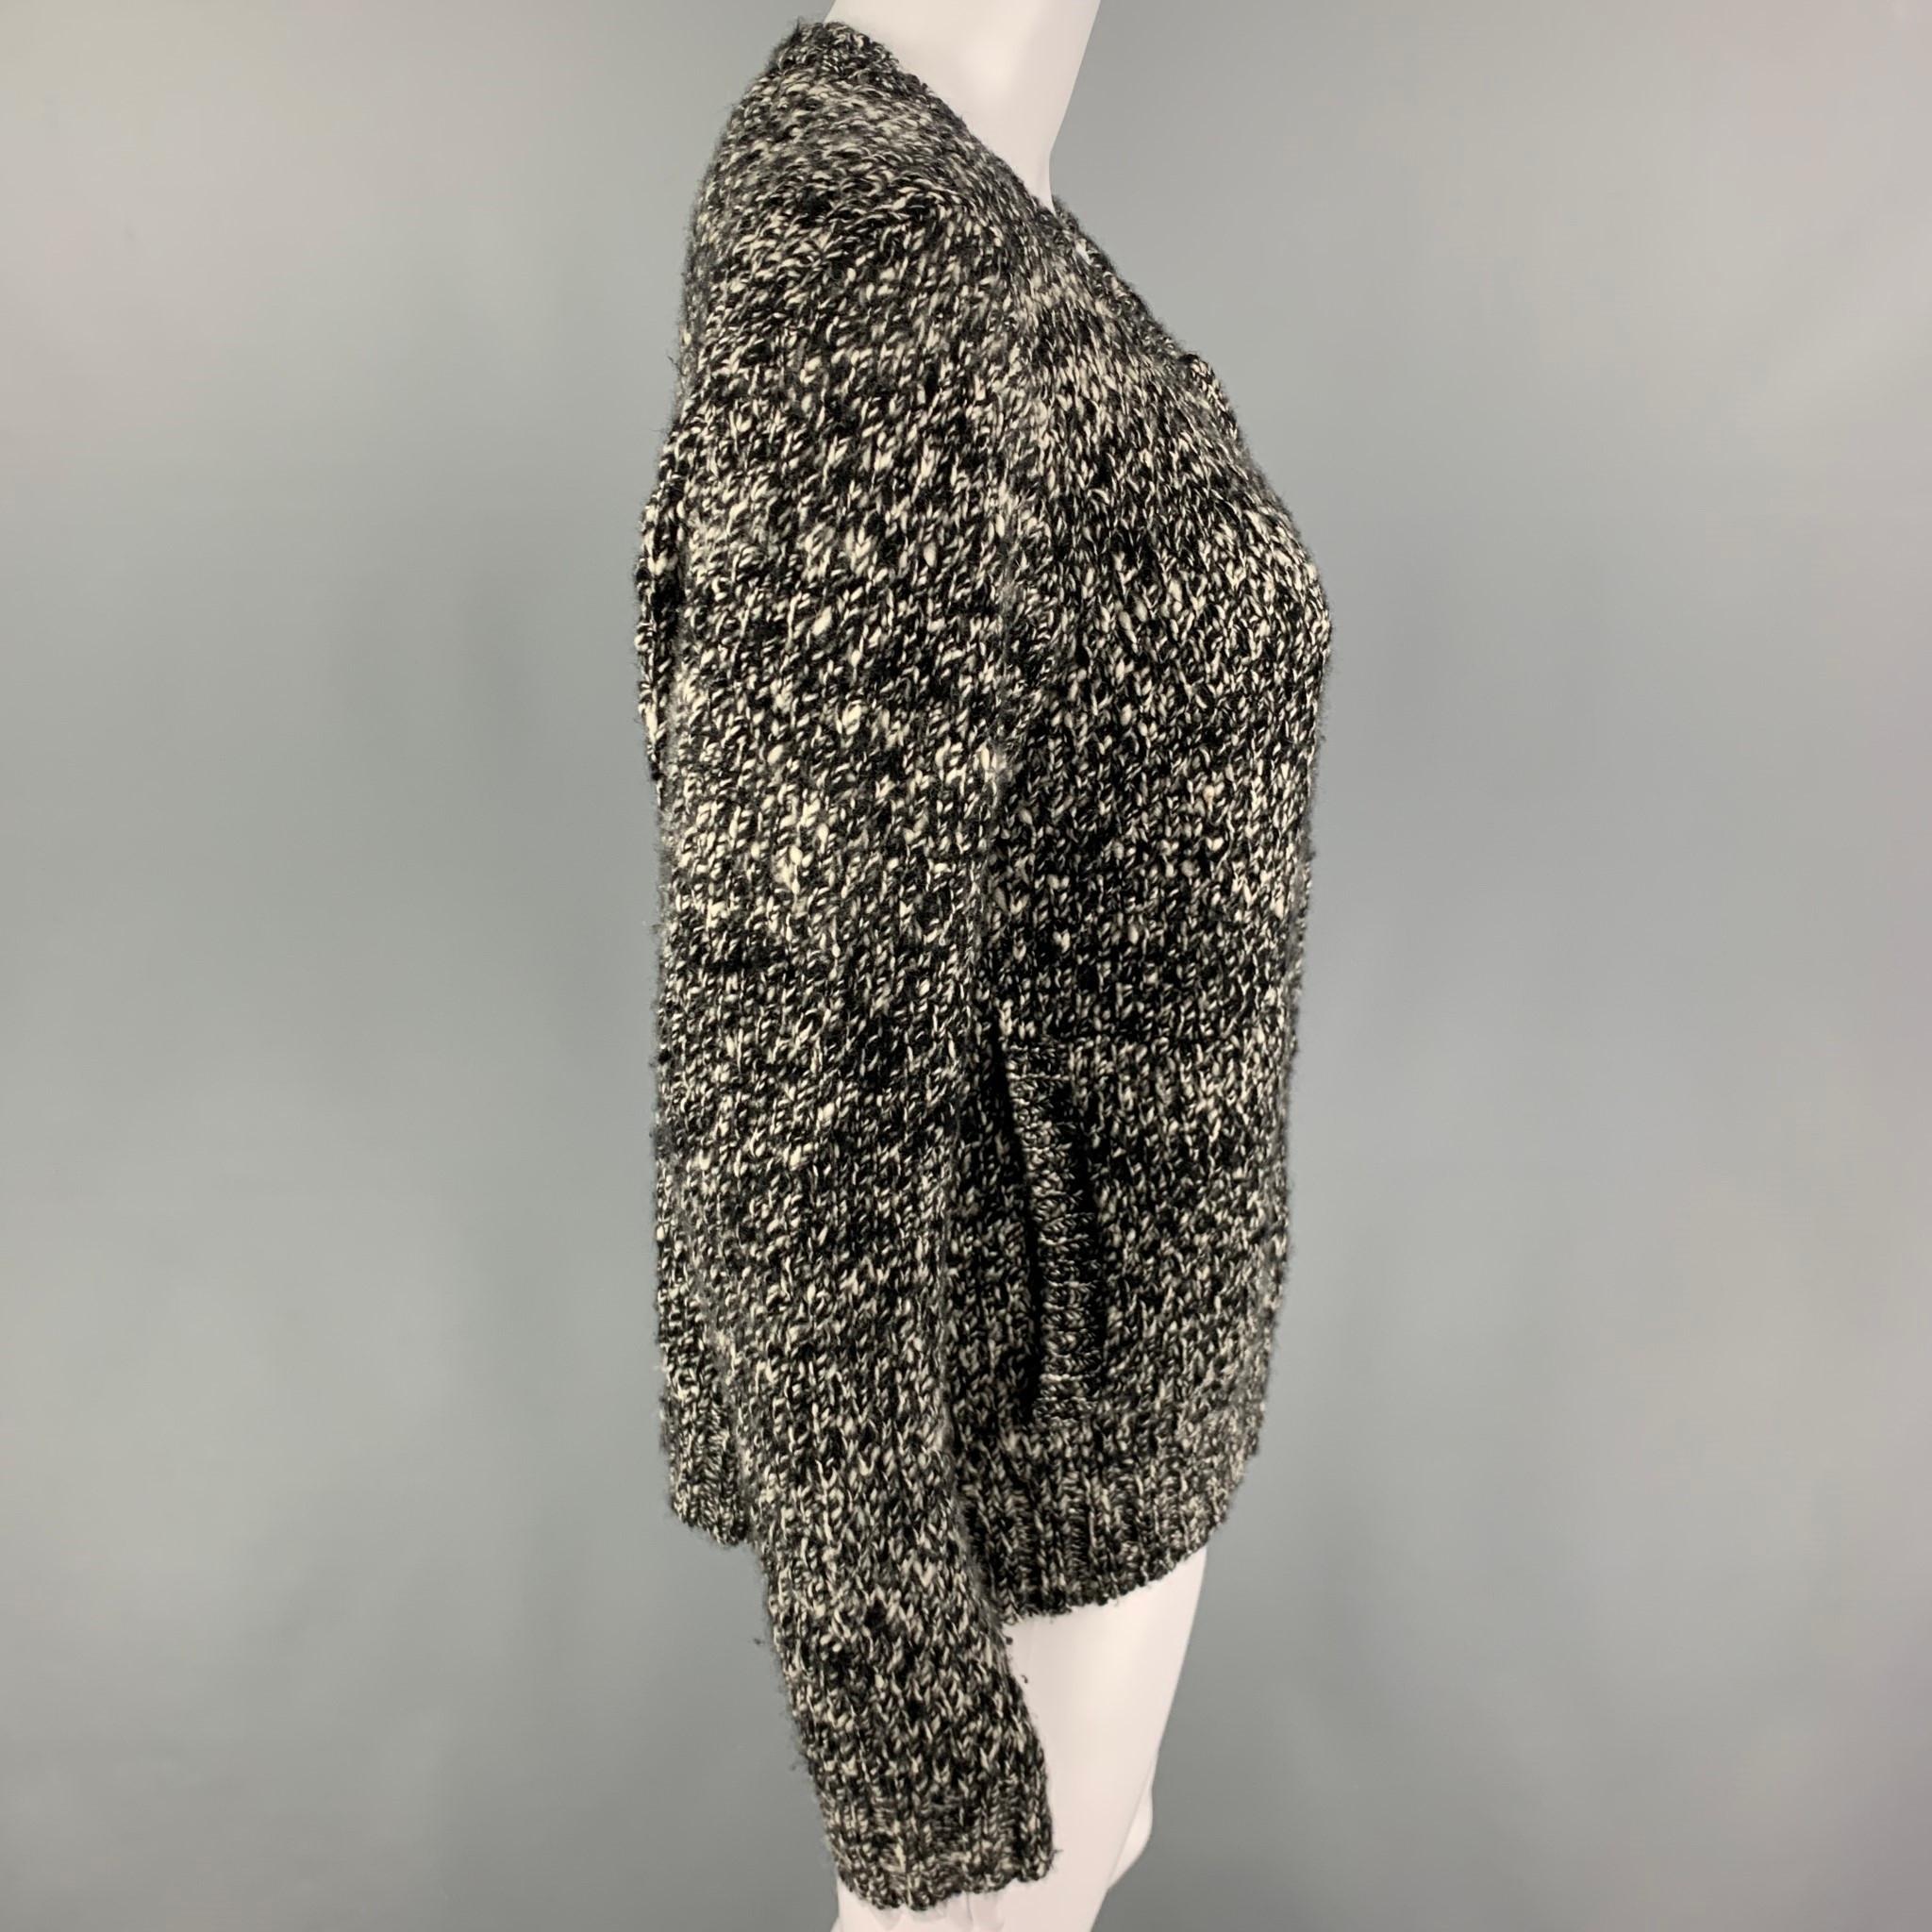 THE ELDER STATESMAN cardigan comes in a black & white marbled knitted cashmere featuring a collarless style, slit pockets, and a full zip up closure. 

Excellent Pre-Owned Condition.
Marked: S

Measurements:

Shoulder: 17 in.
Bust: 40 in.
Sleeve: 26